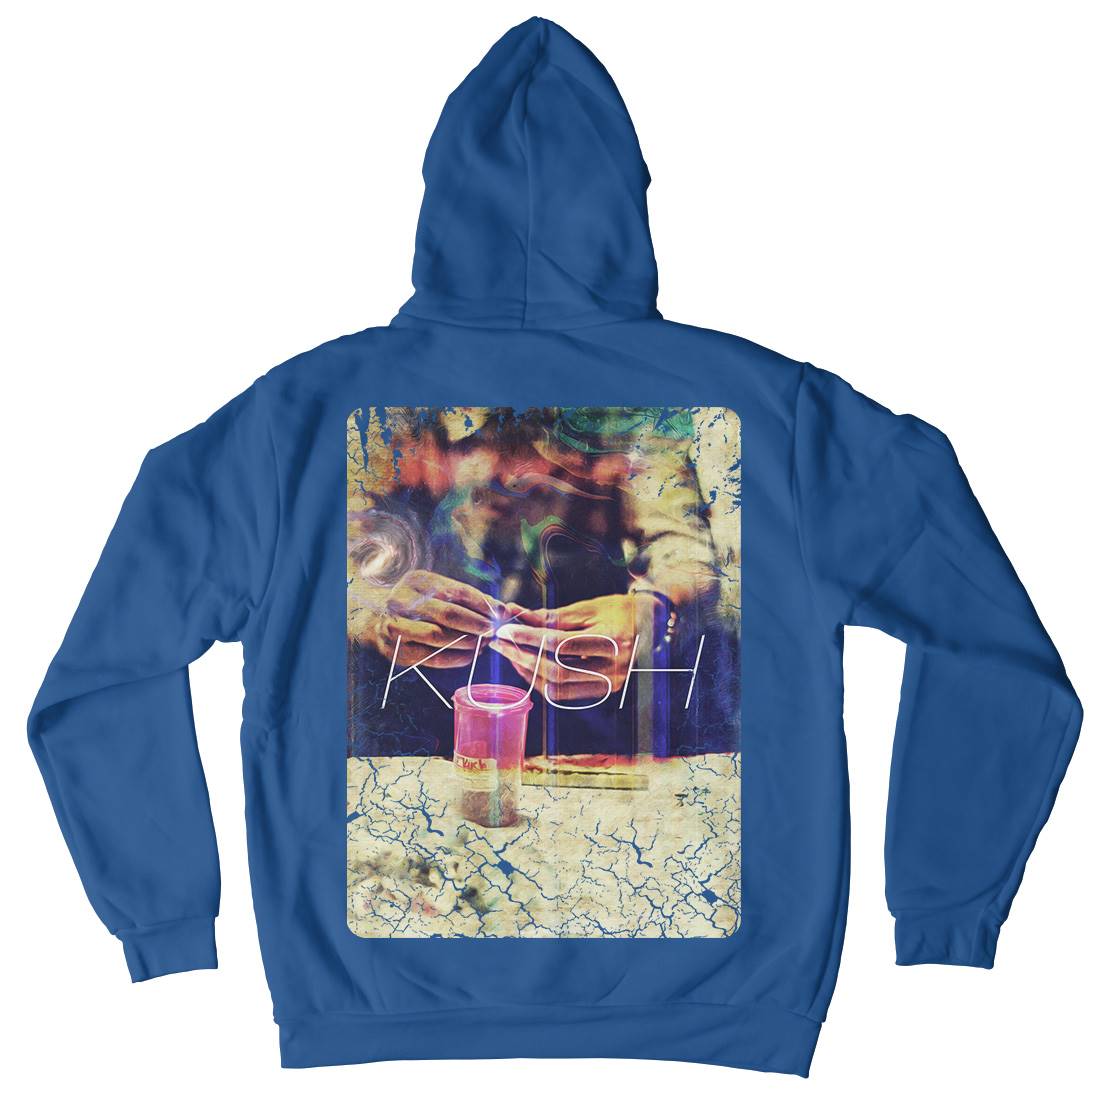 Kush Trippin Mens Hoodie With Pocket Drugs A857